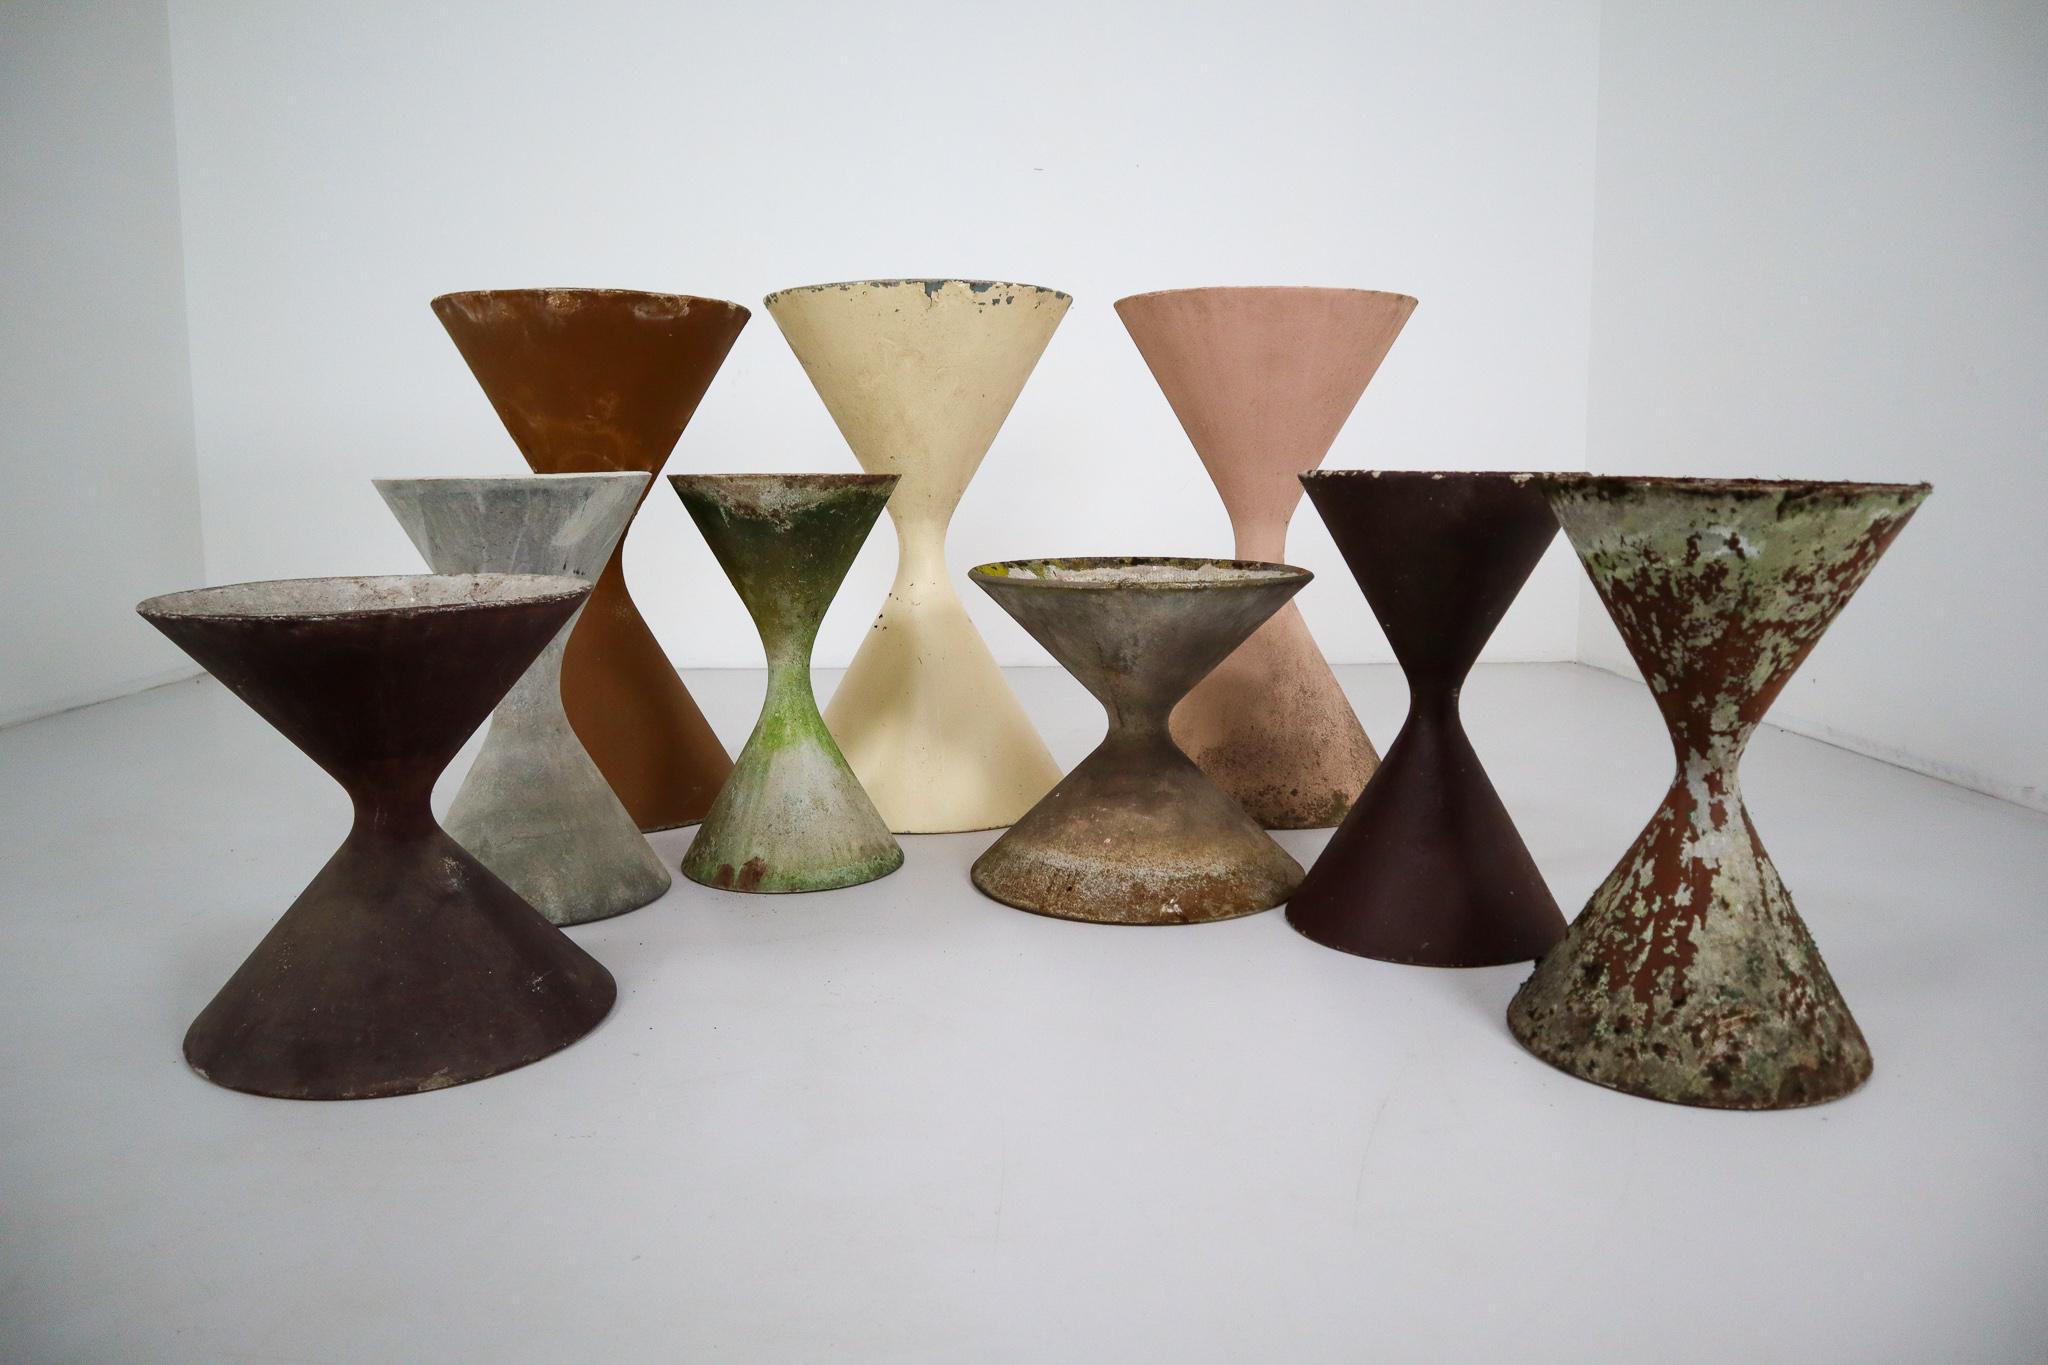 Designed by the iconic Willy Guhl in the early 1950s, and made of fiber cement by Eternit, SA, these nine planters sport various shades of old, weathered paint and are in good condition. This unique hourglass shaped planters are fresh and modern